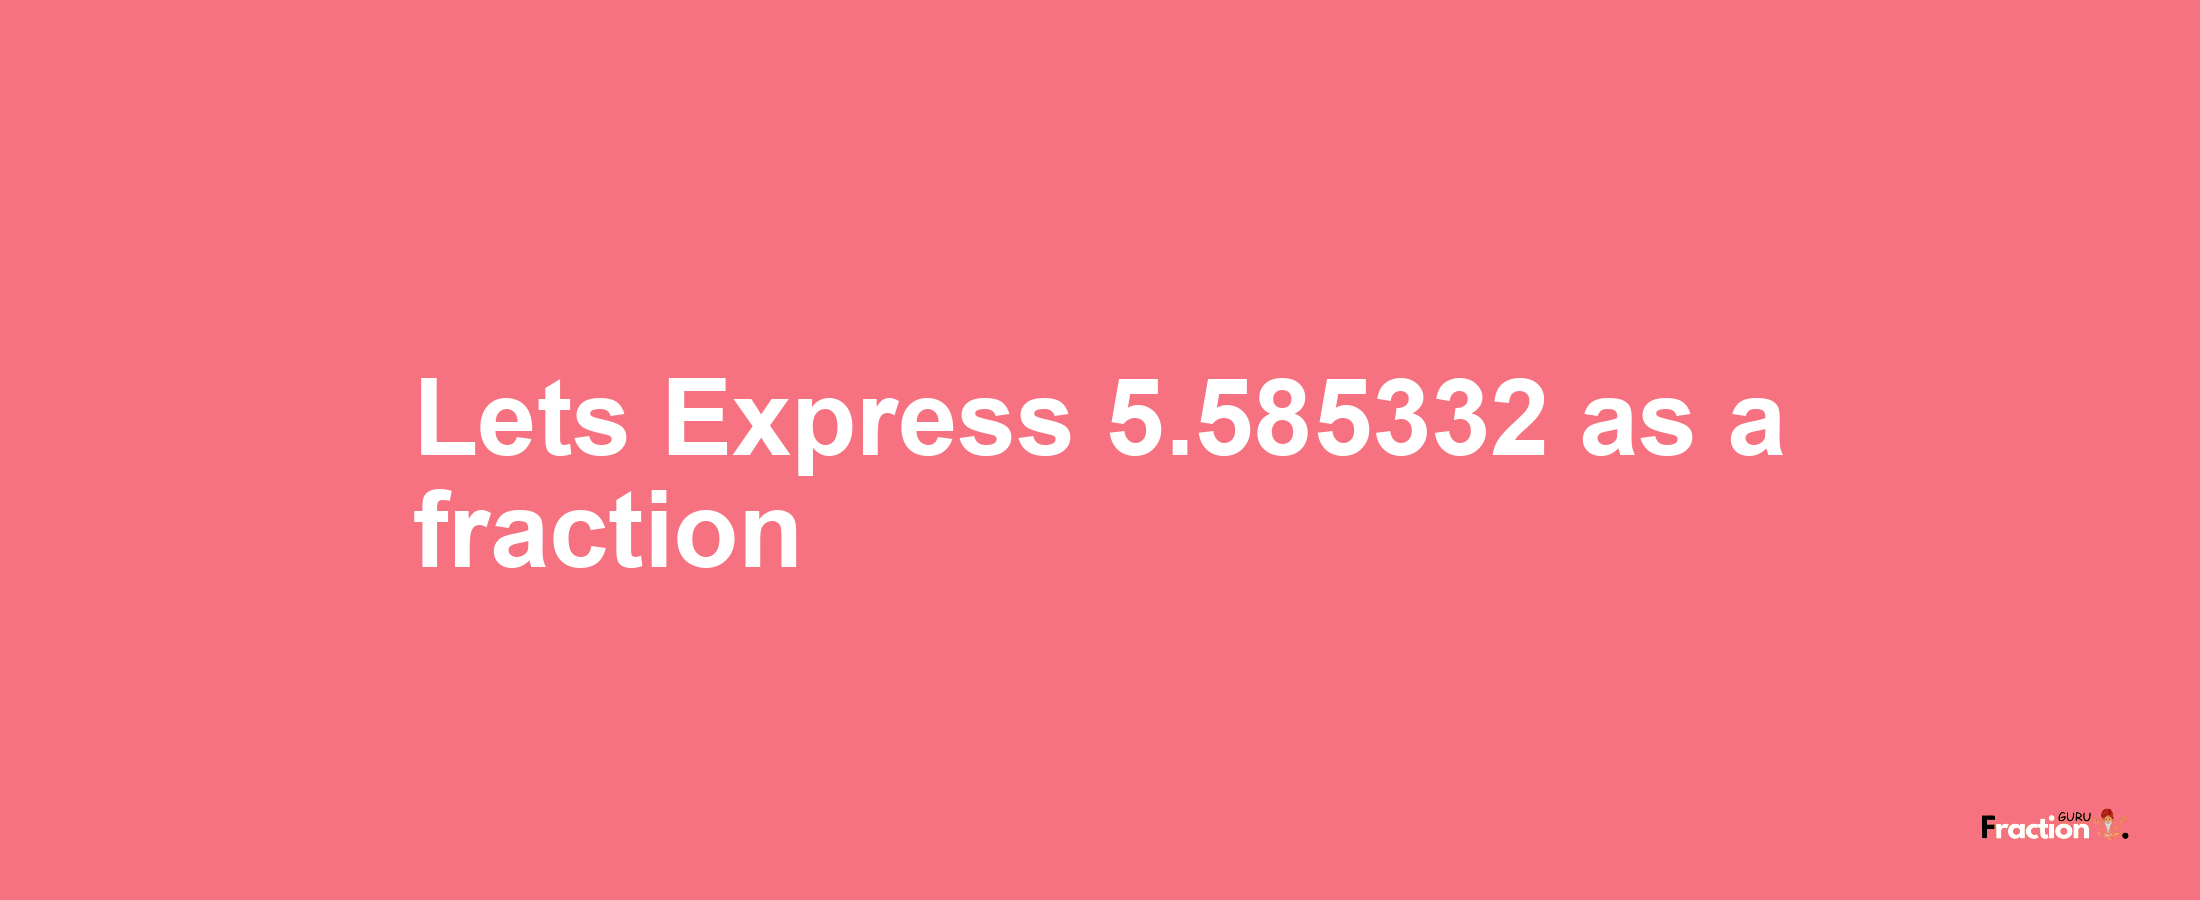 Lets Express 5.585332 as afraction